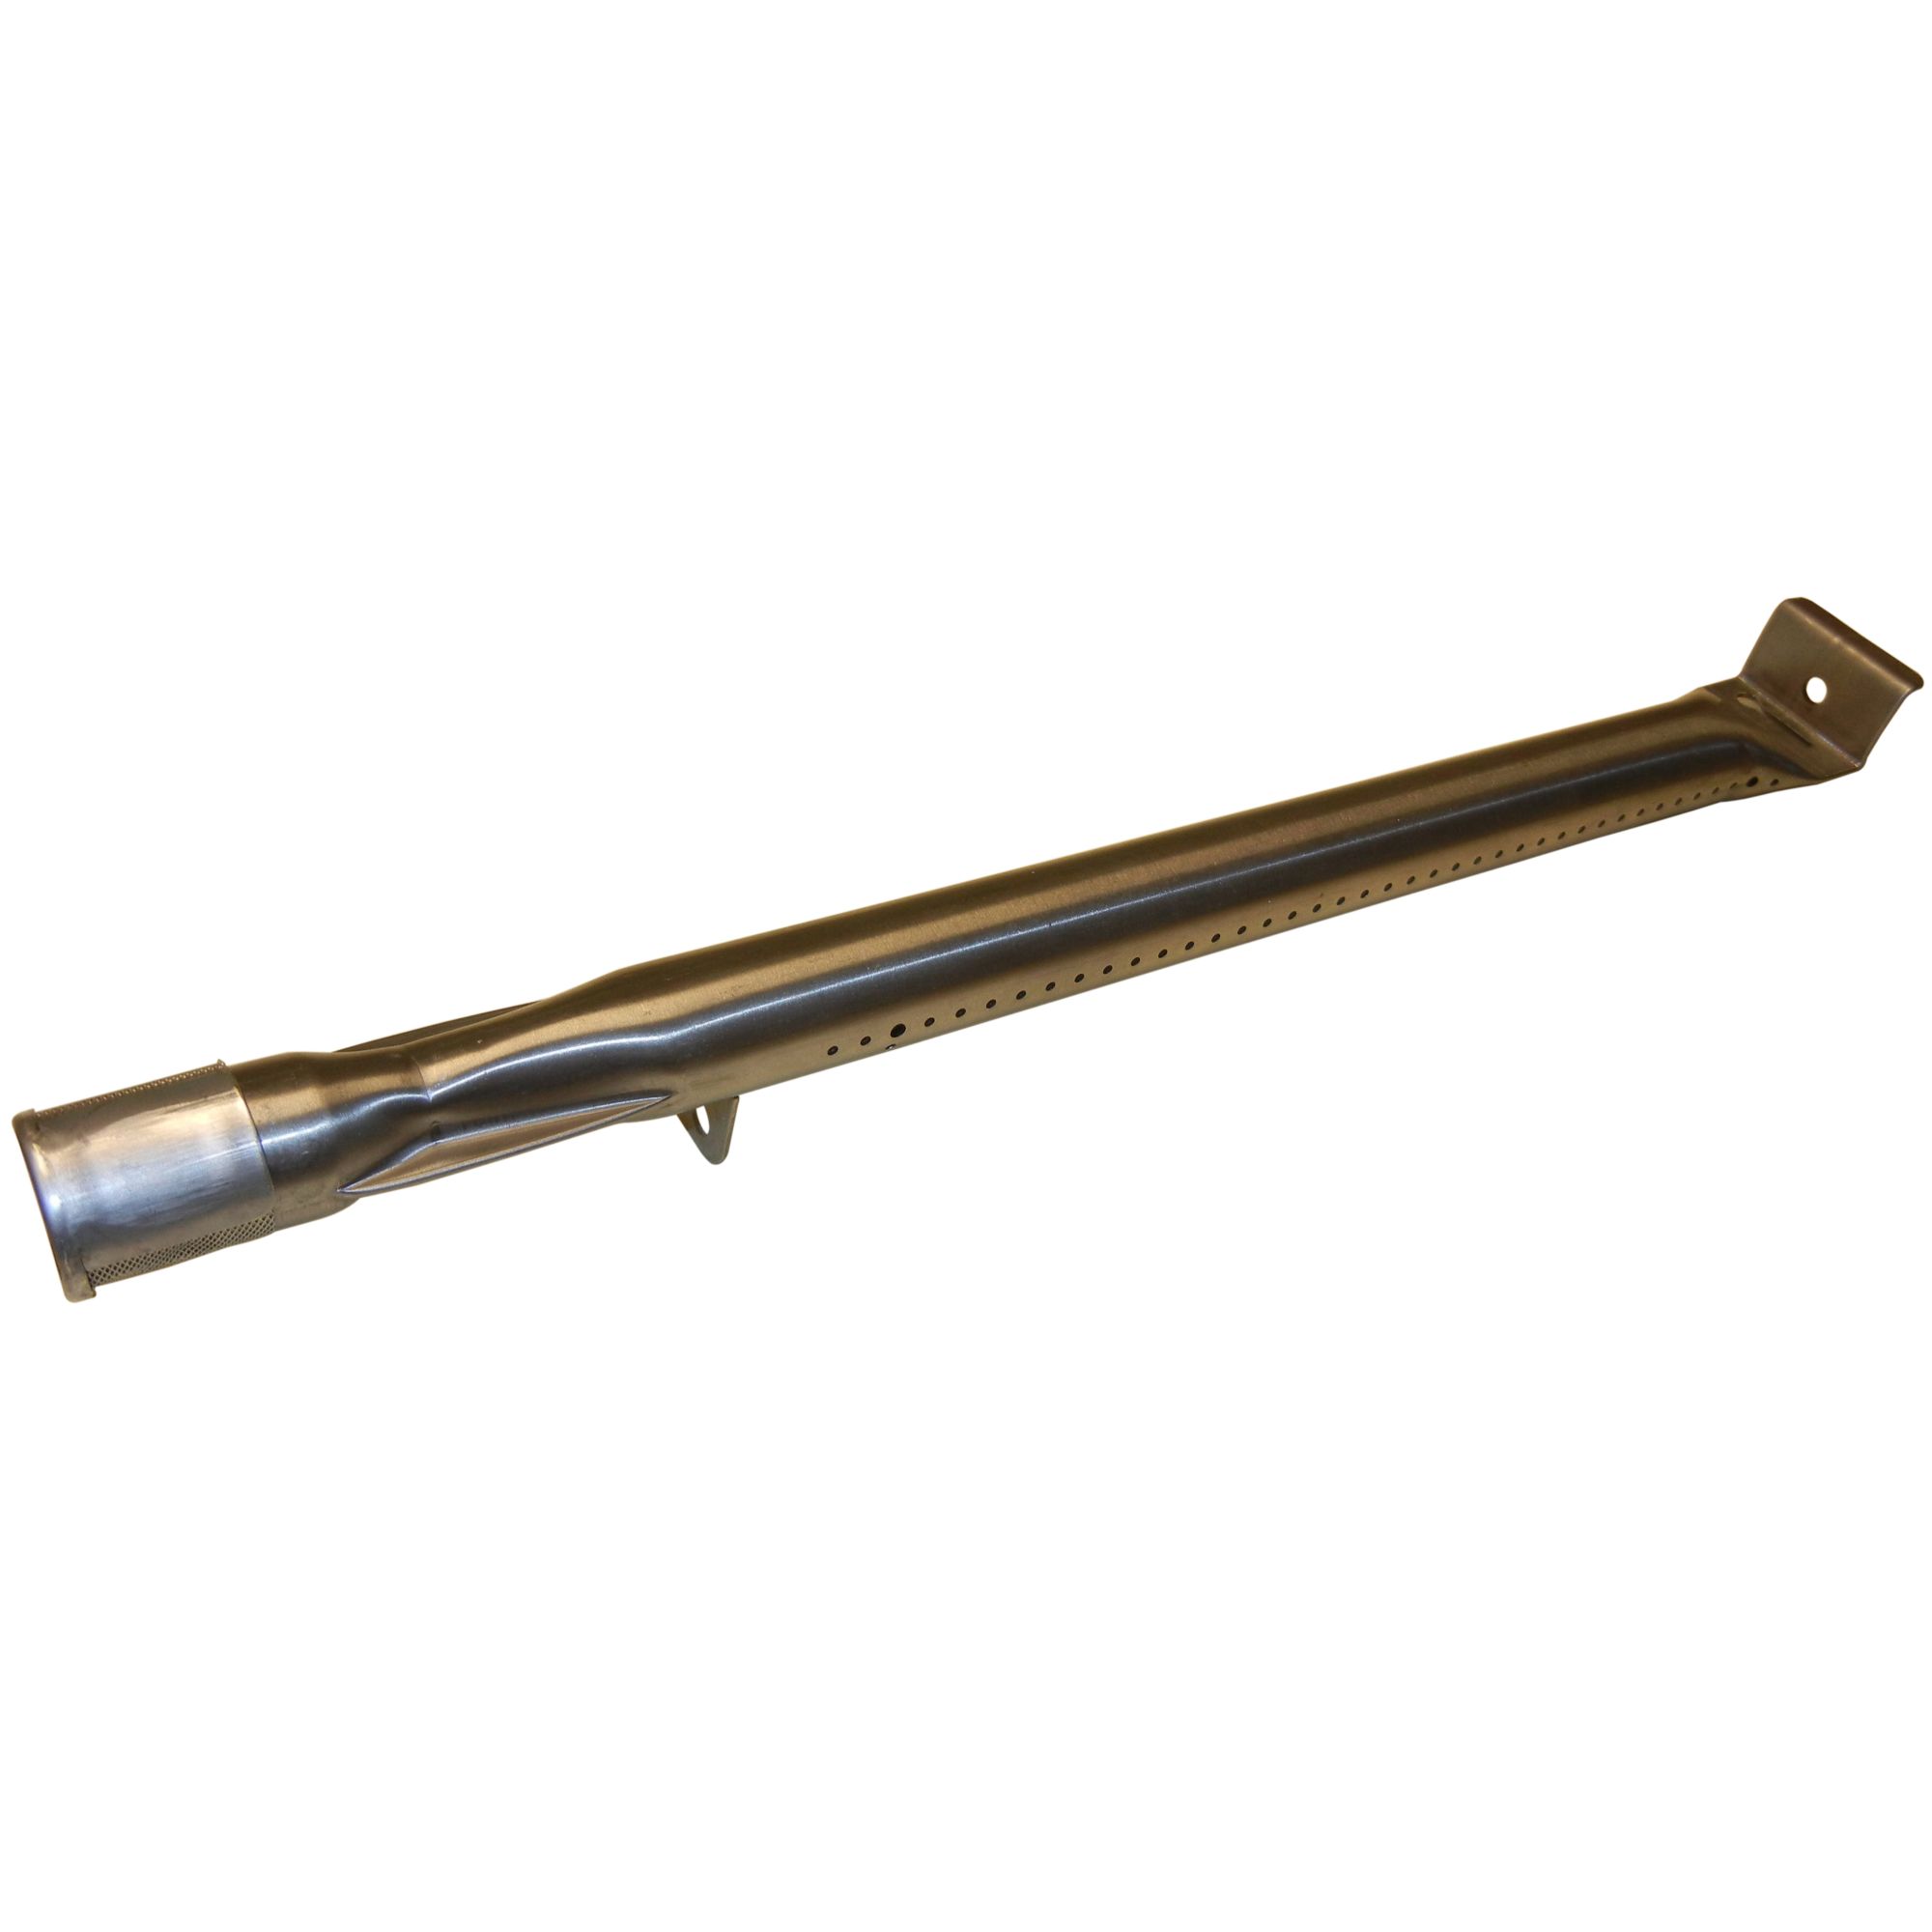 Stainless steel burner for Uniflame brand gas grills